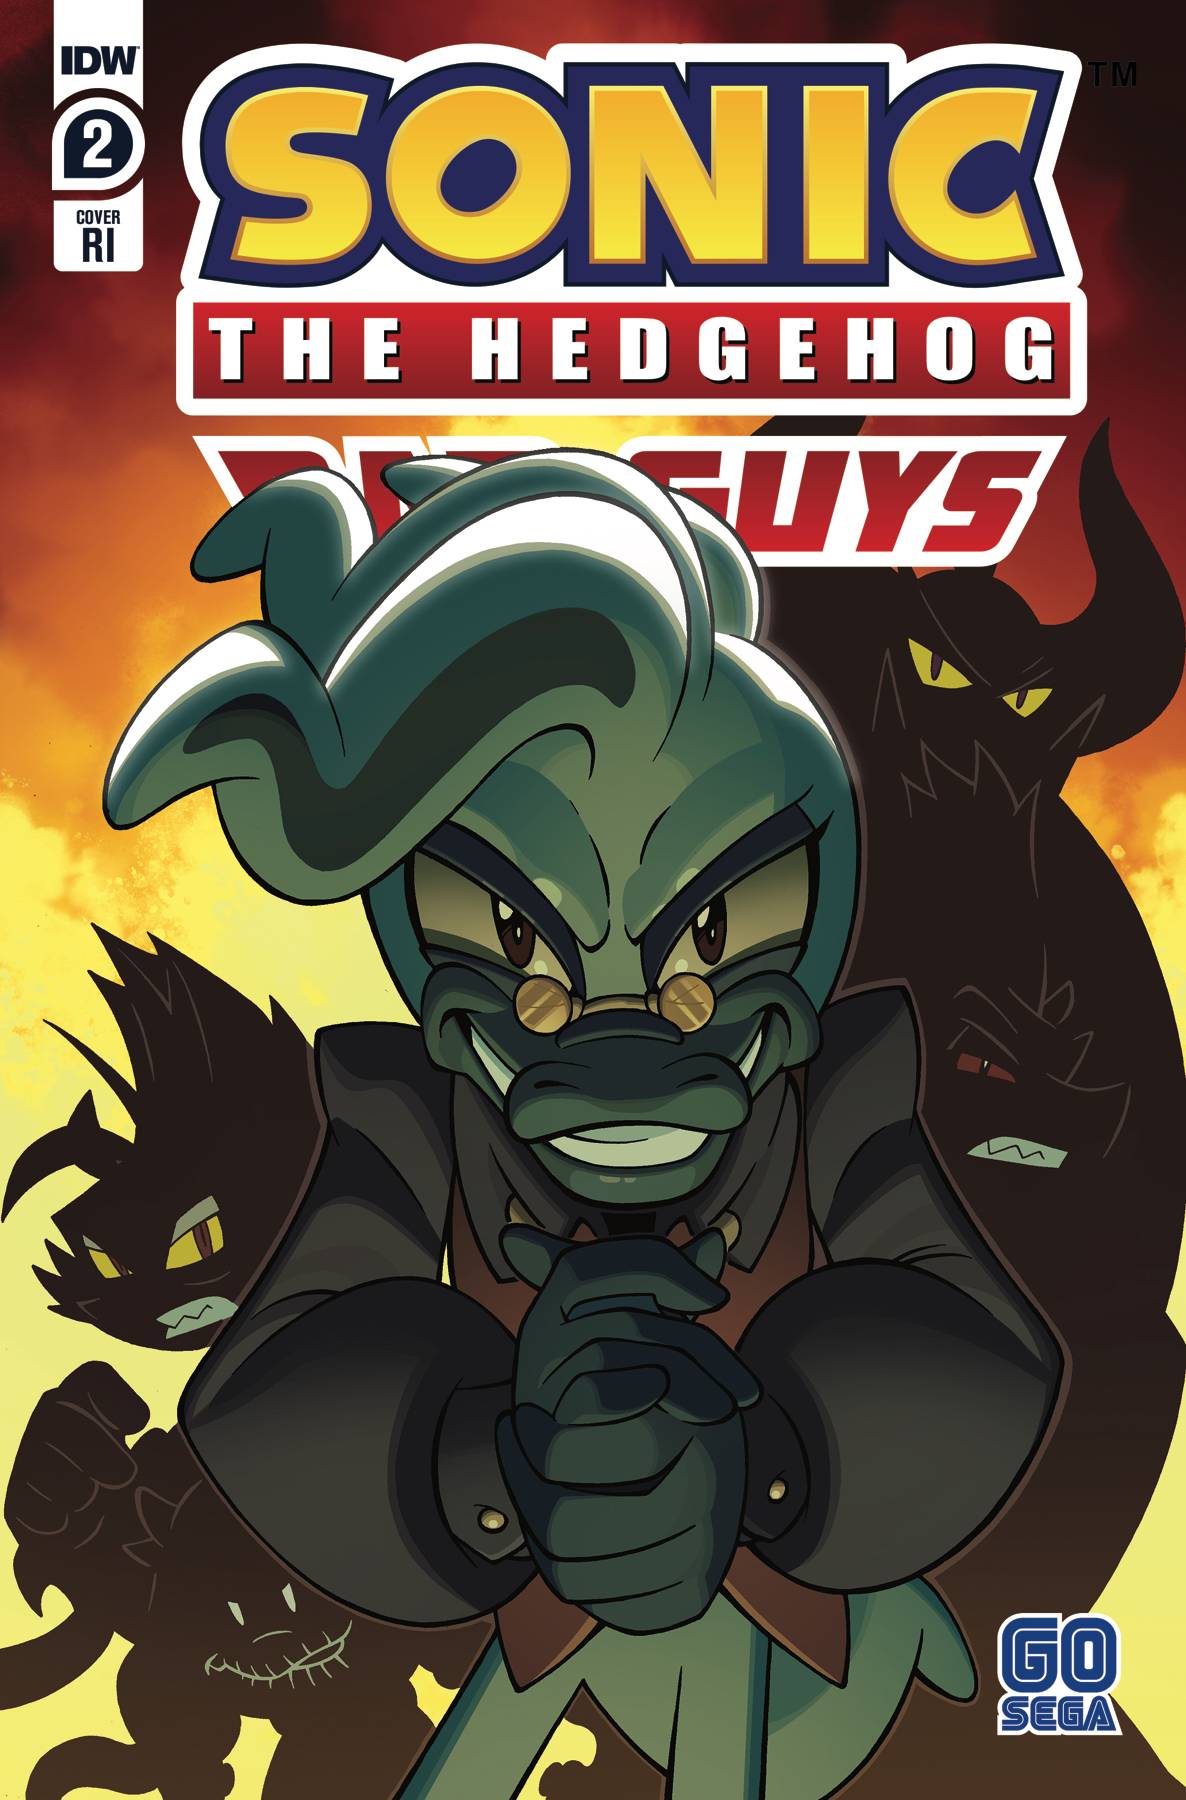 SONIC THE HEDGEHOG BAD GUYS #2 (OF 4) 10 COPY INCV LAWRENCE